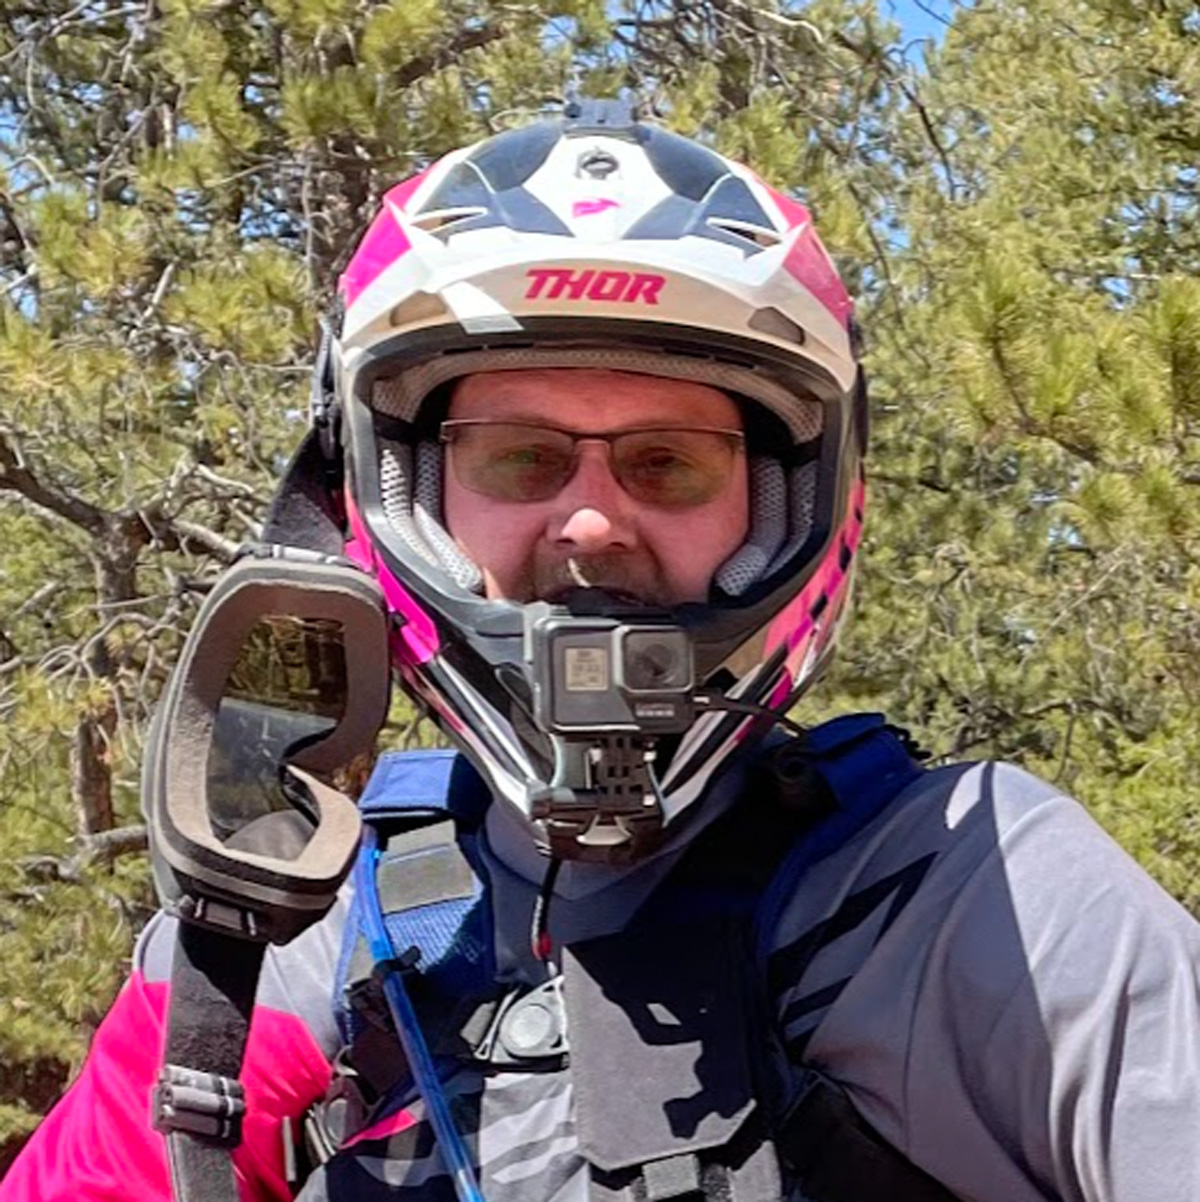 Keith Woodard - Coach and Guide for Enduro Ranch